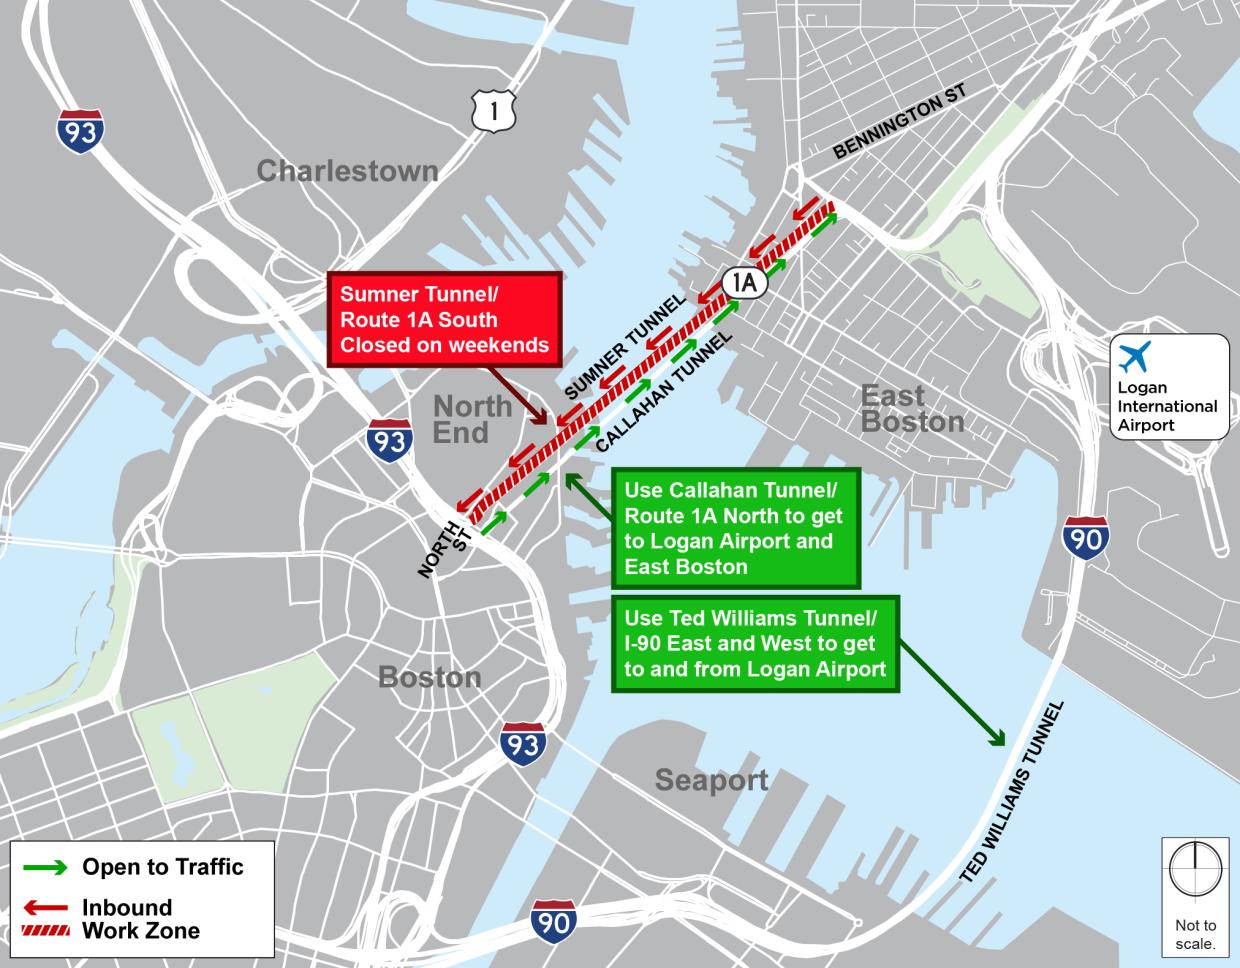 detour map - Sumner Tunnel/Route 1A South is closed on weekends. Use Callahan Tunnel/Route 1A North to get to Logan Airport and East Boston. Use Ted Williams Tunnel/I-90 to get to and from Logan Airport